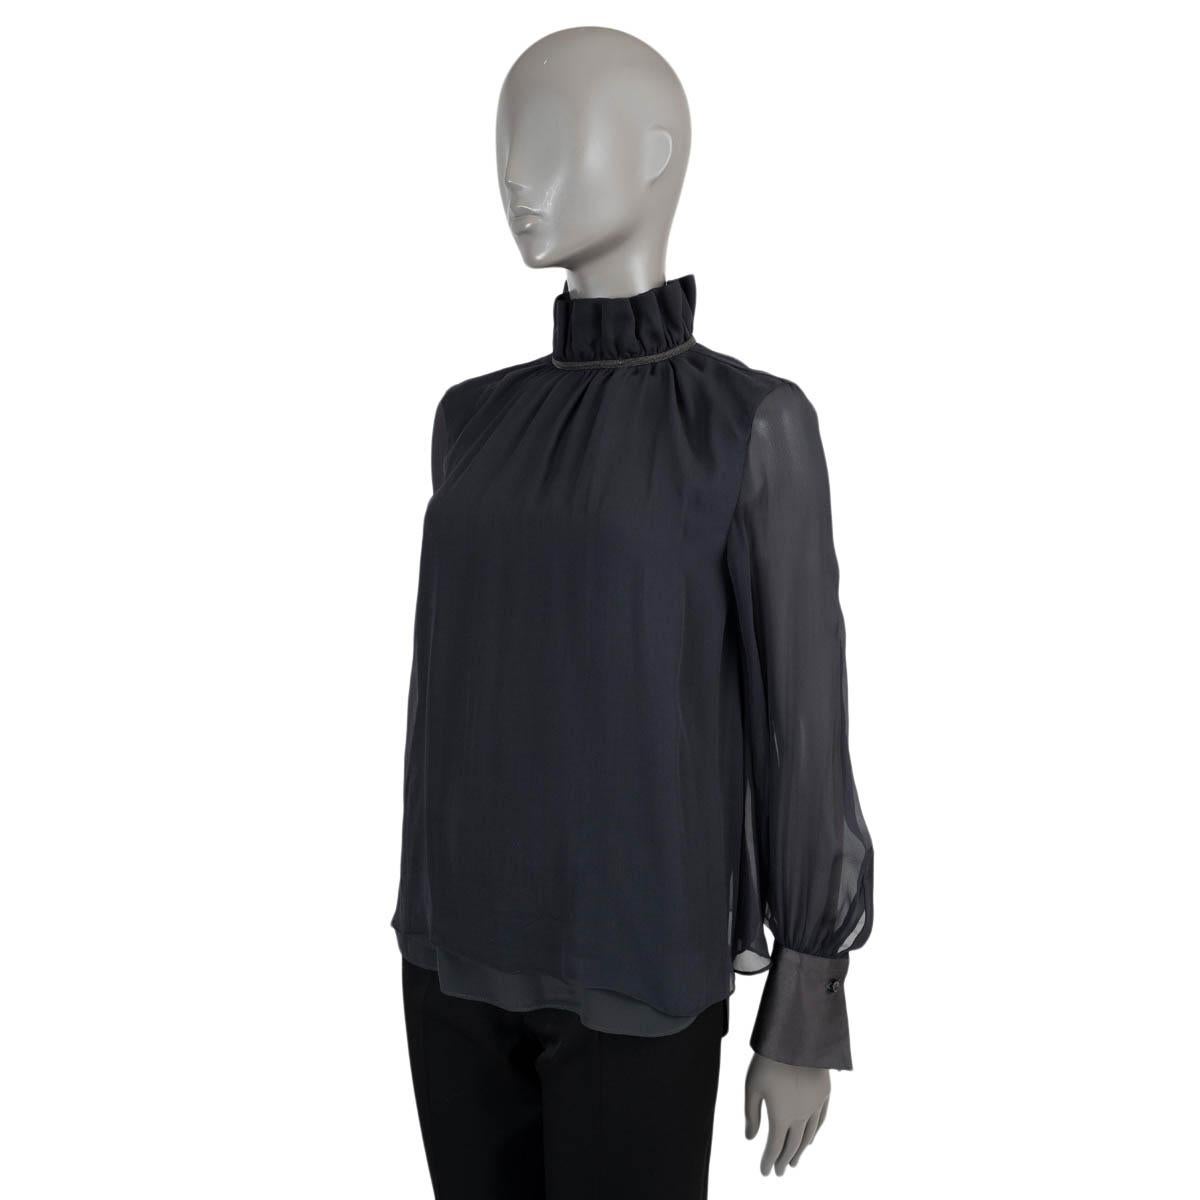 100% authentic Brunello Cucinelli layered chiffon blouse in black silk (100%). Features a ruffled high neck with Monili trim, body layered with slightly longer satin and buttoned satin cuffs. Opens with a button in the back. Has been worn and is in